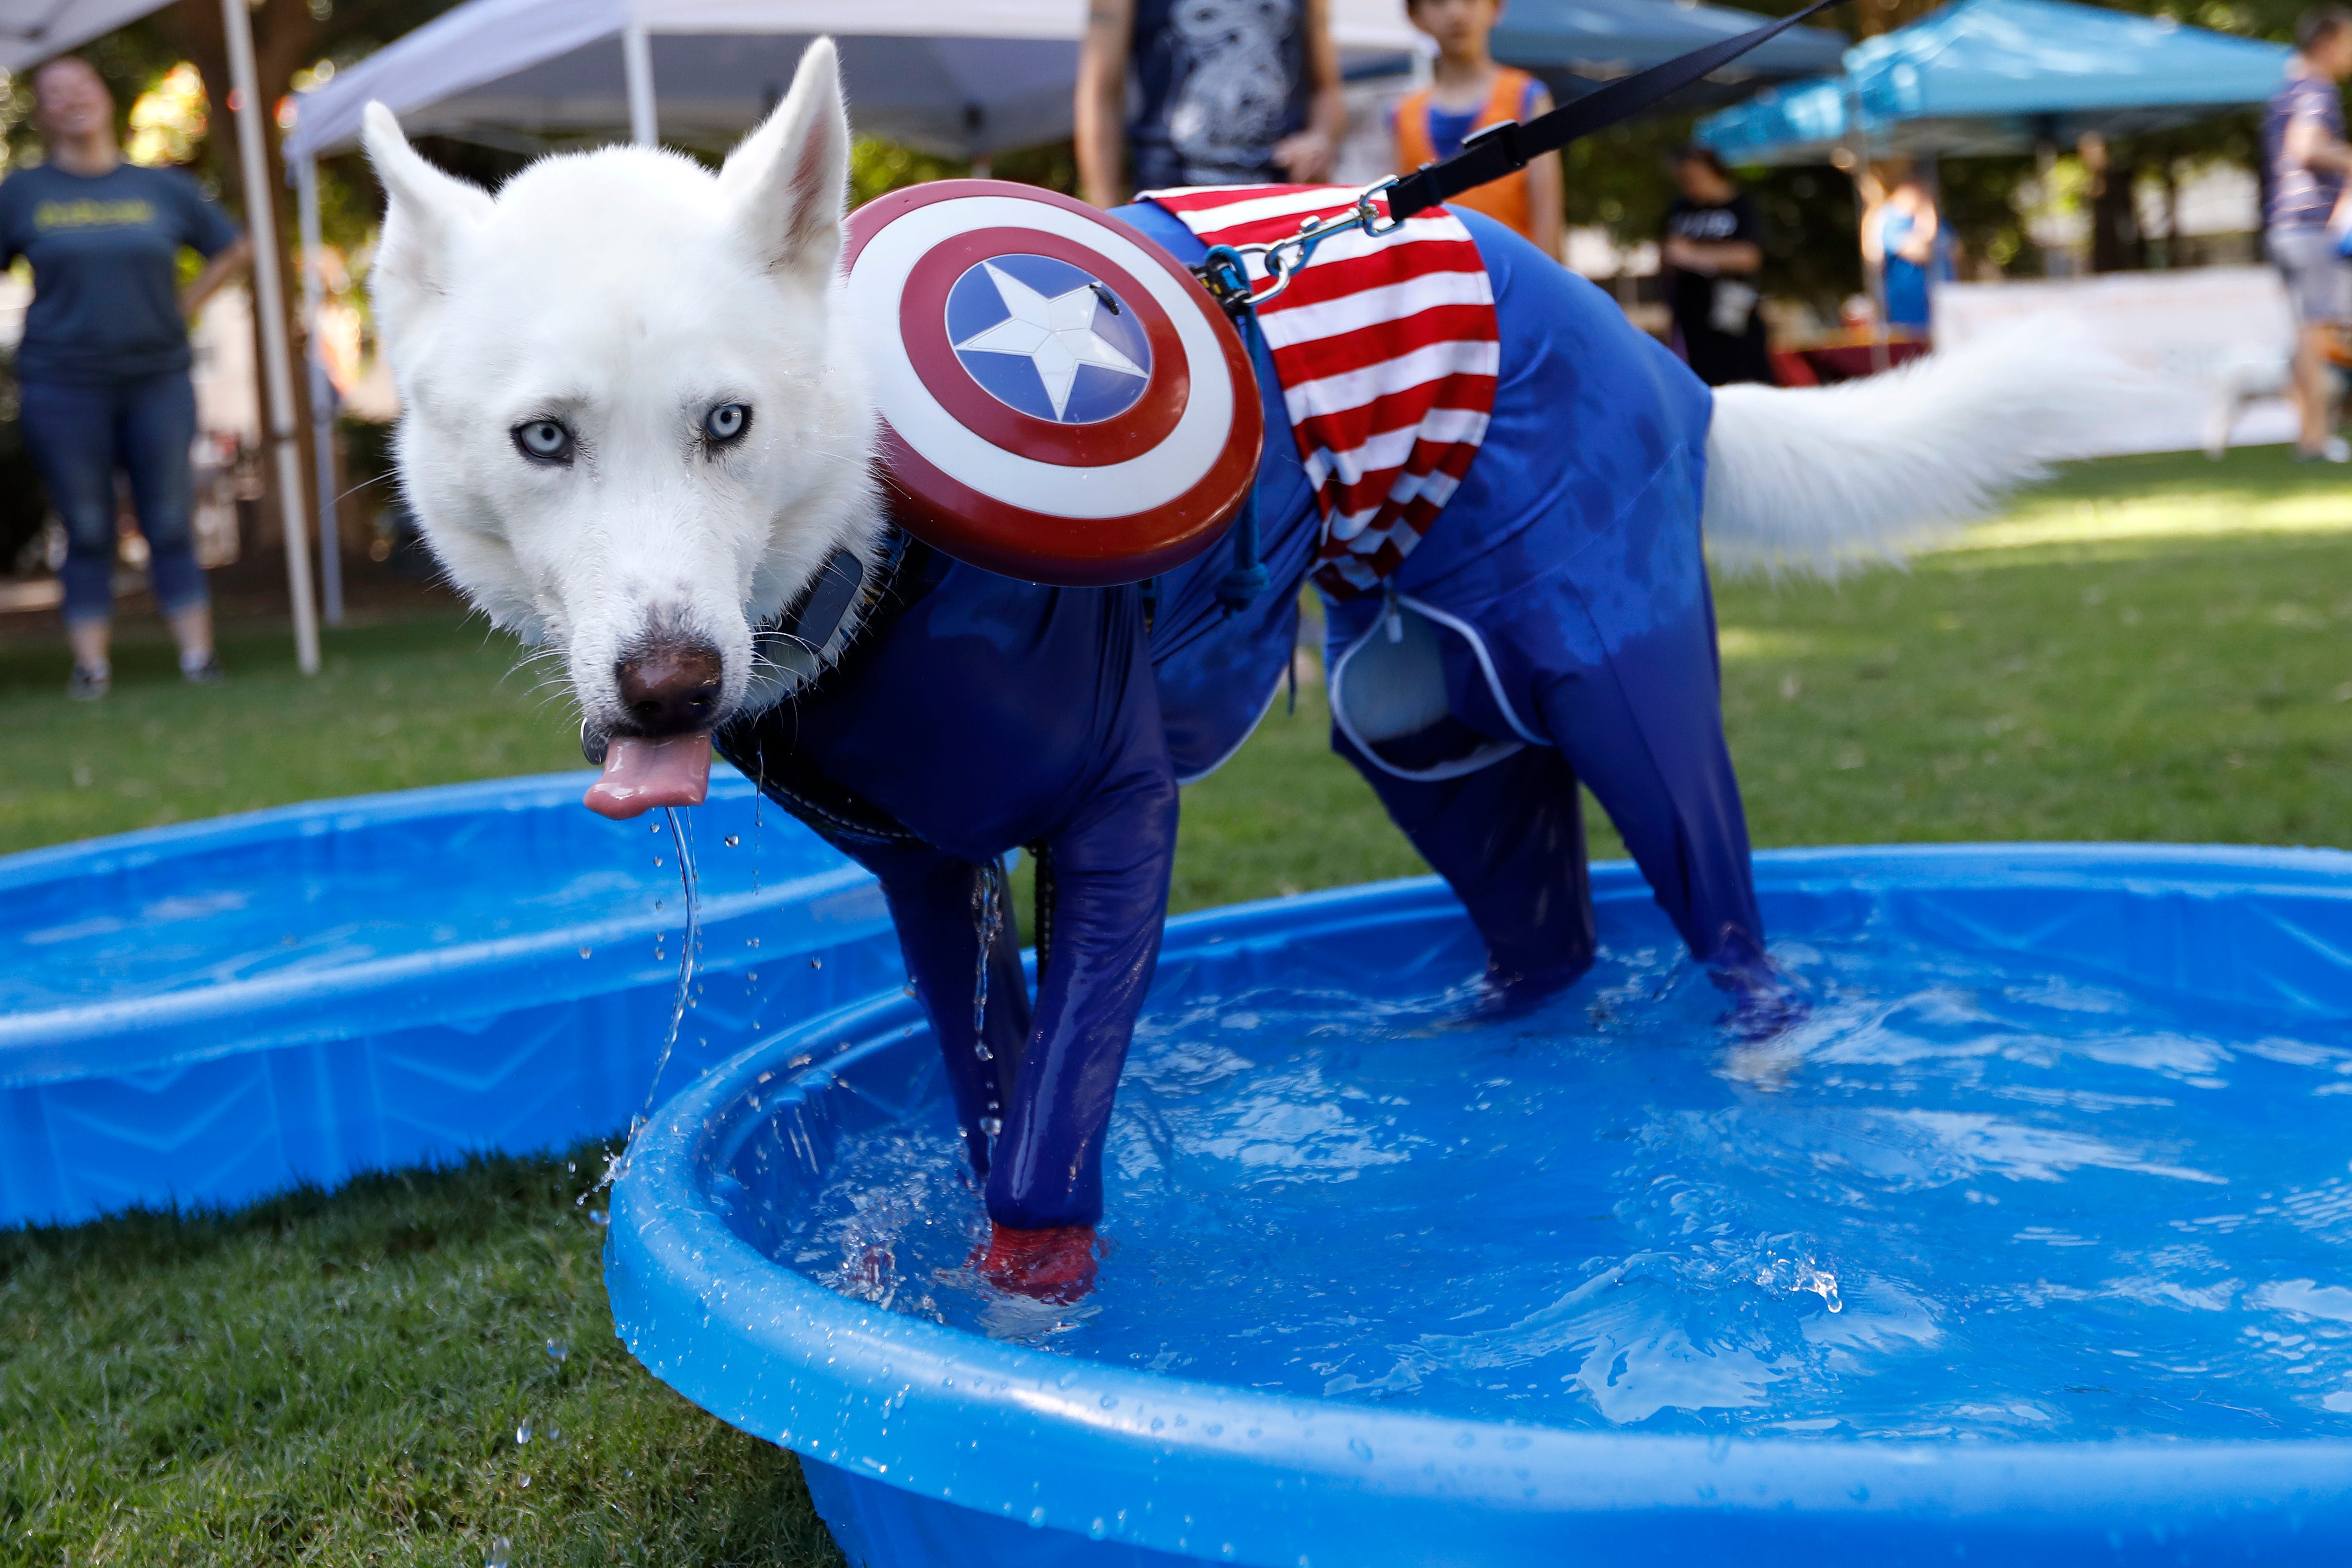 A Siberian Husky in a Captain America costume takes a dip in the pool during Doggy Con in Woodruff Park, Saturday, Aug. 17, 2019, in Atlanta. Event organizers said they set up dog cooling stations to help prevent dogs from overheating during the event, which occurred on a 90-degree (32.2 Celsius) day.